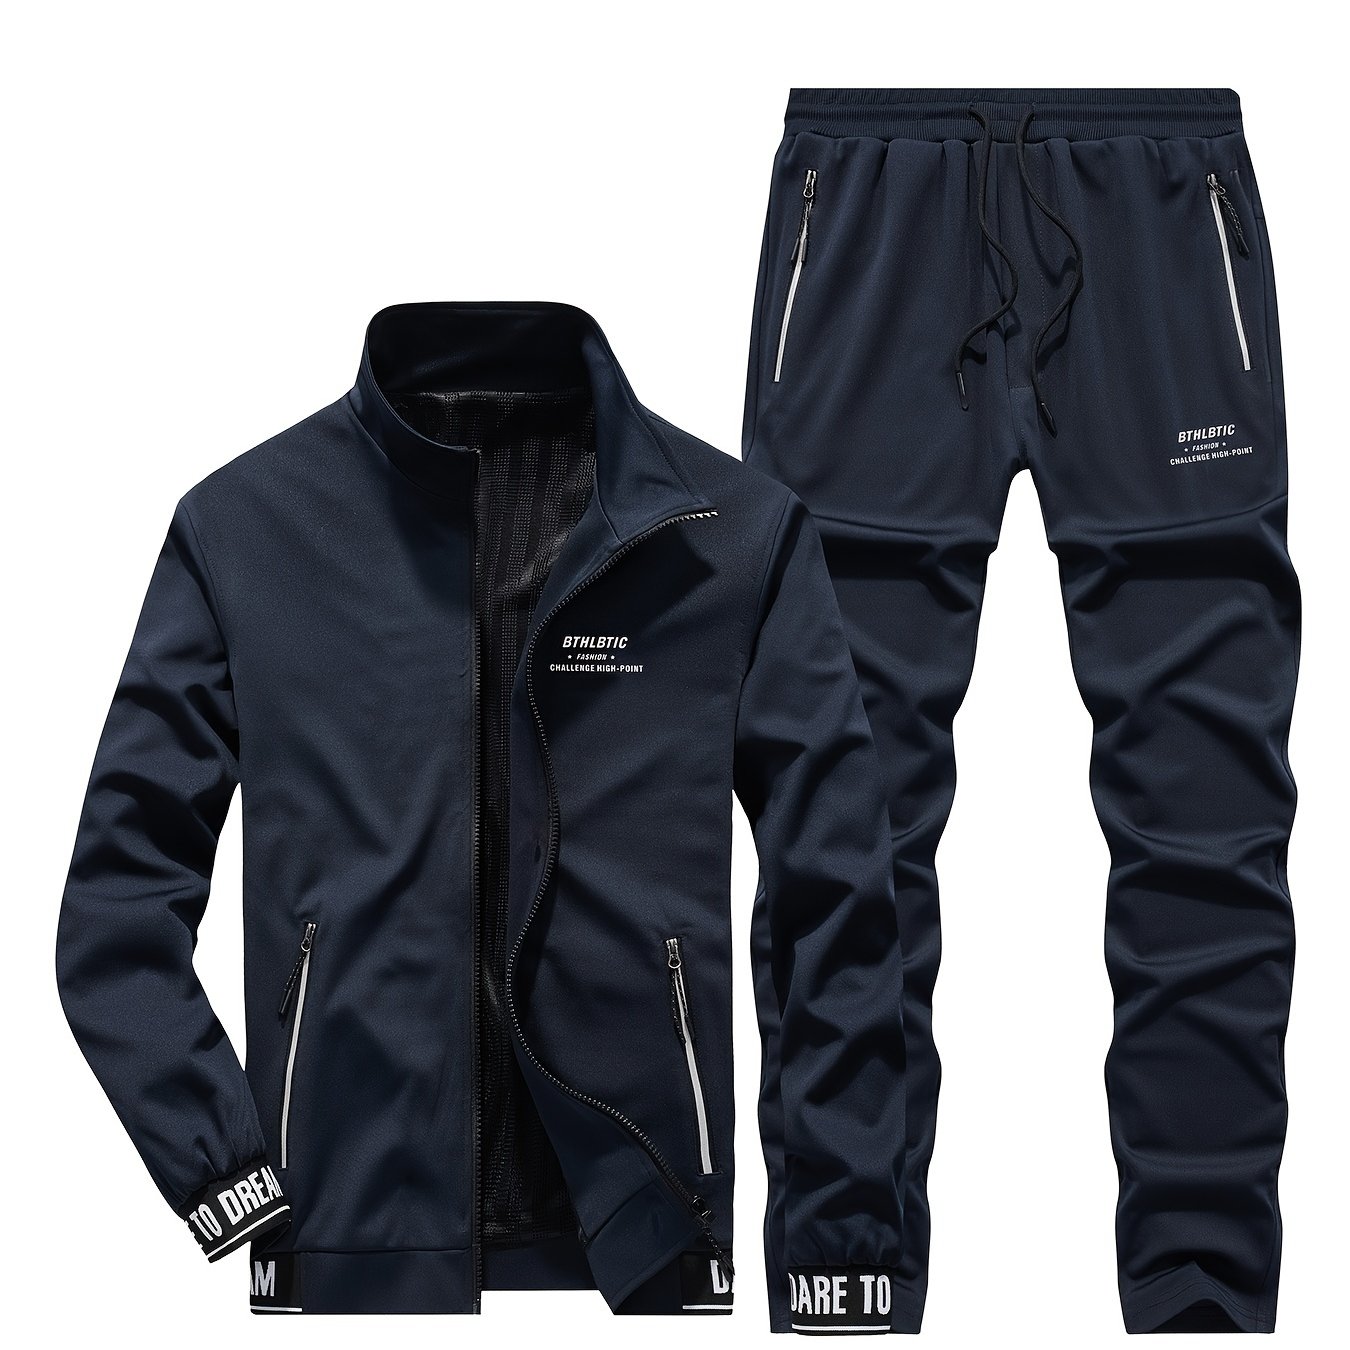 Men's Tracksuit Set, Middle-aged Full-Zip Jacket & Jogger Sports Pant For  Gym Training Best Sellers